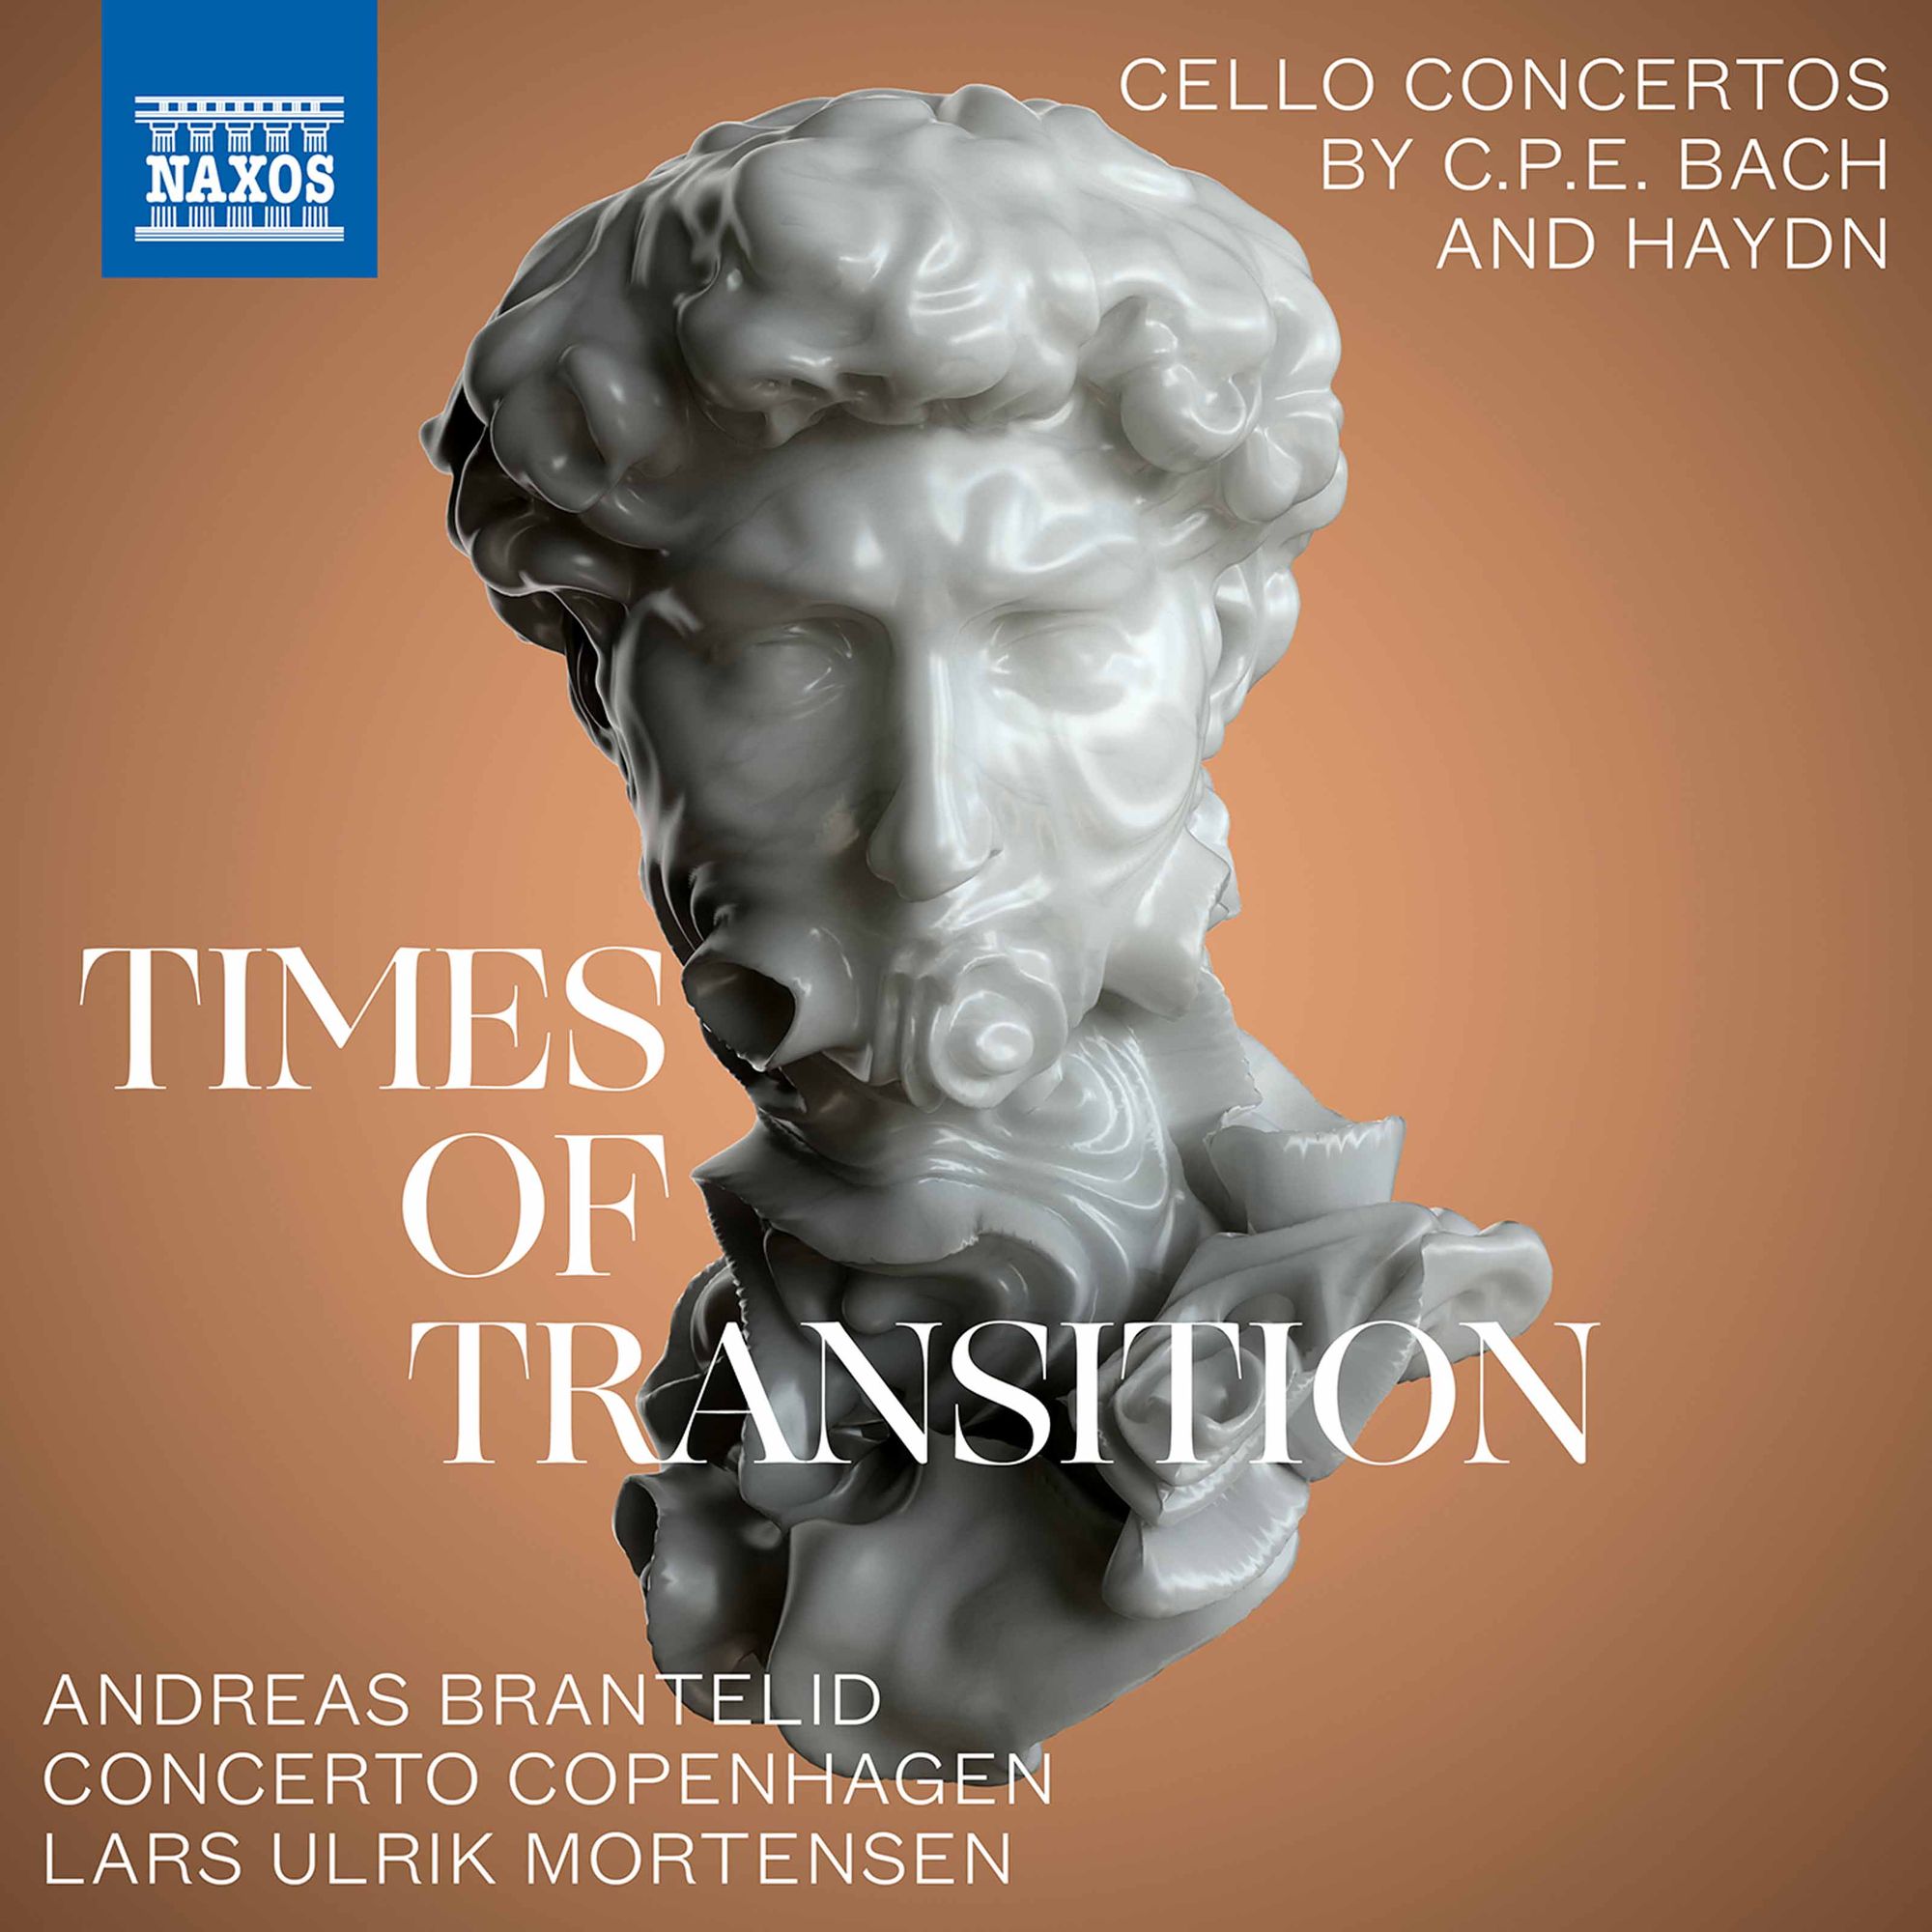 Times of Transition: C. P. E. Bach and Haydn